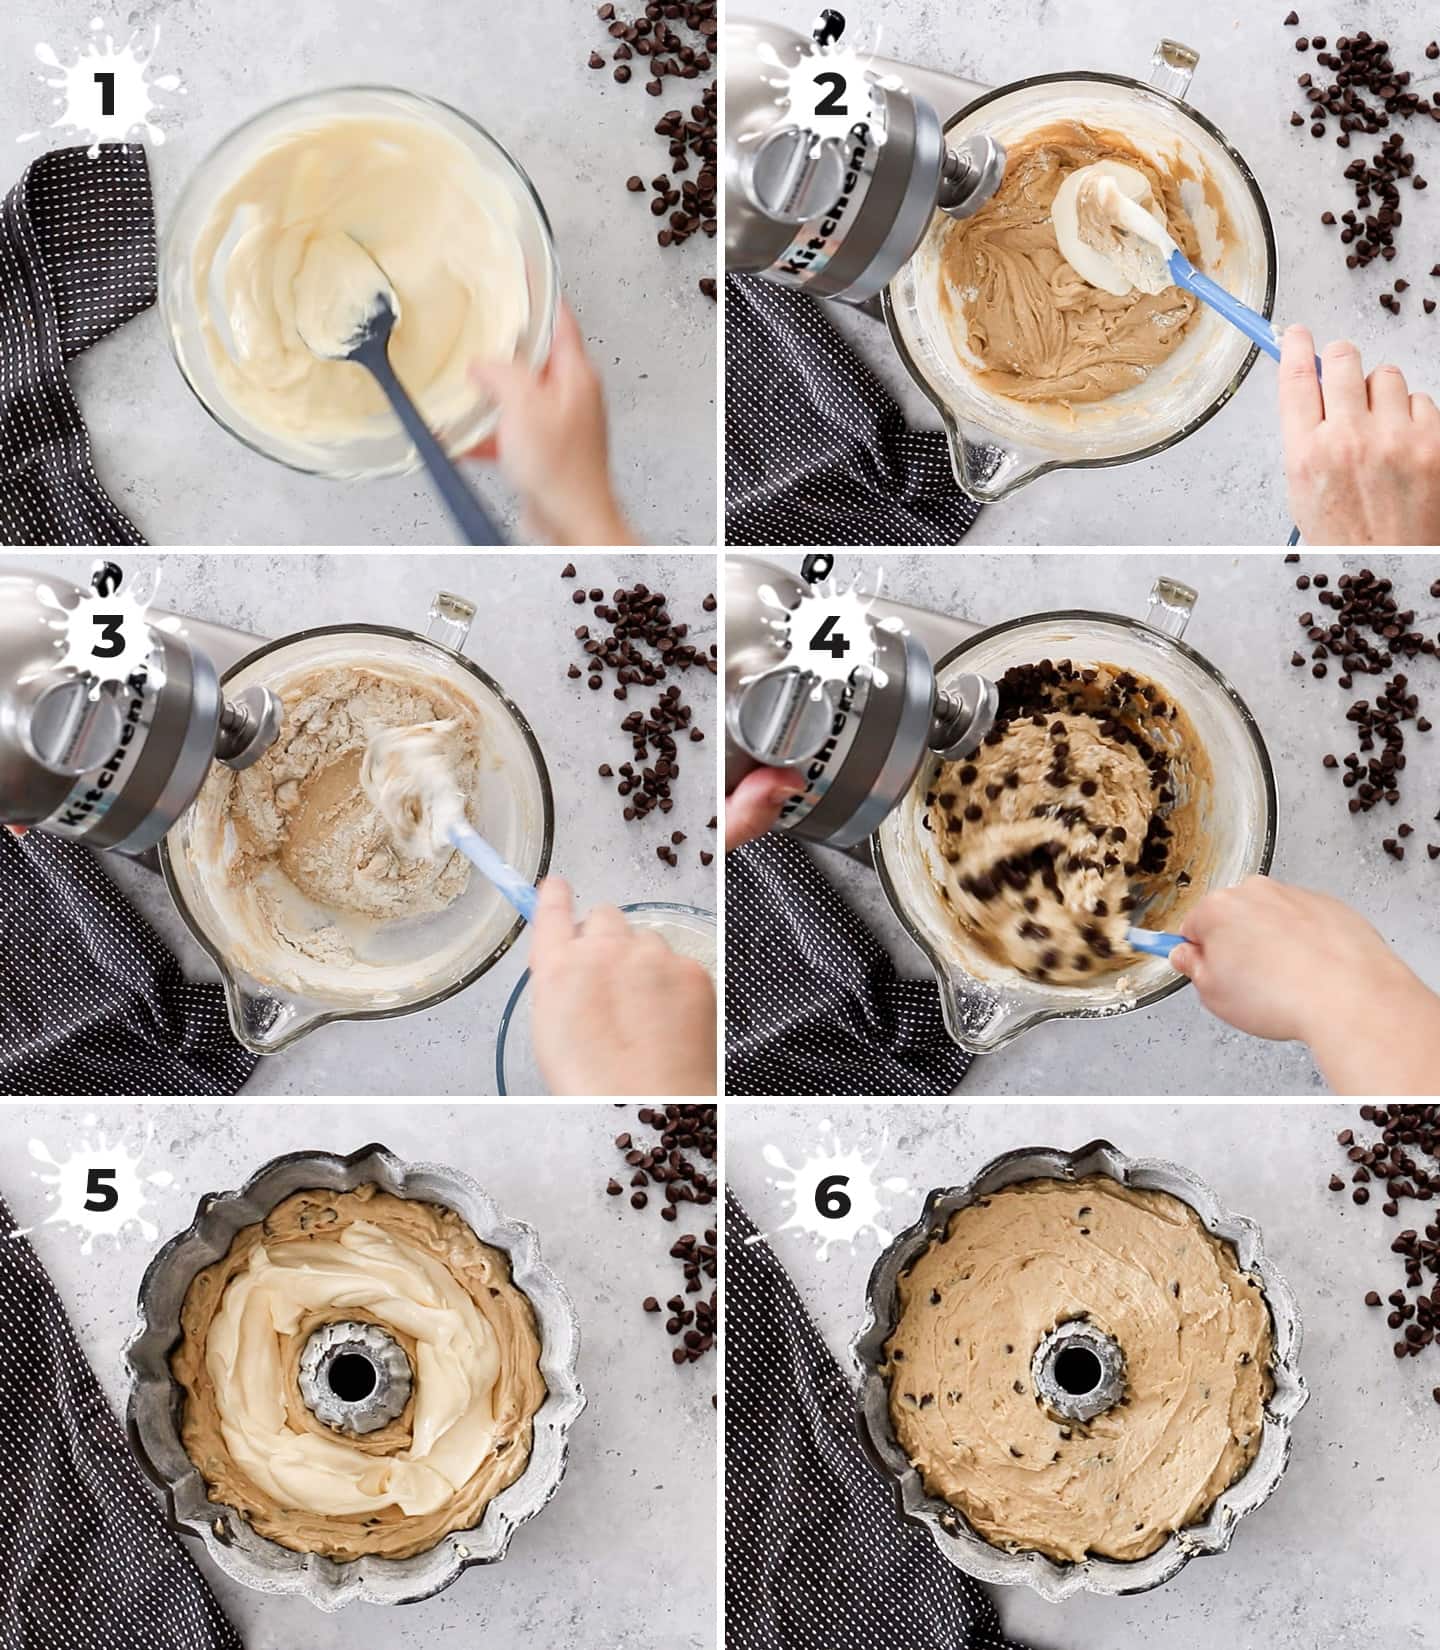 A collage of 6 images showing how to make chocolate chip bundt cake.